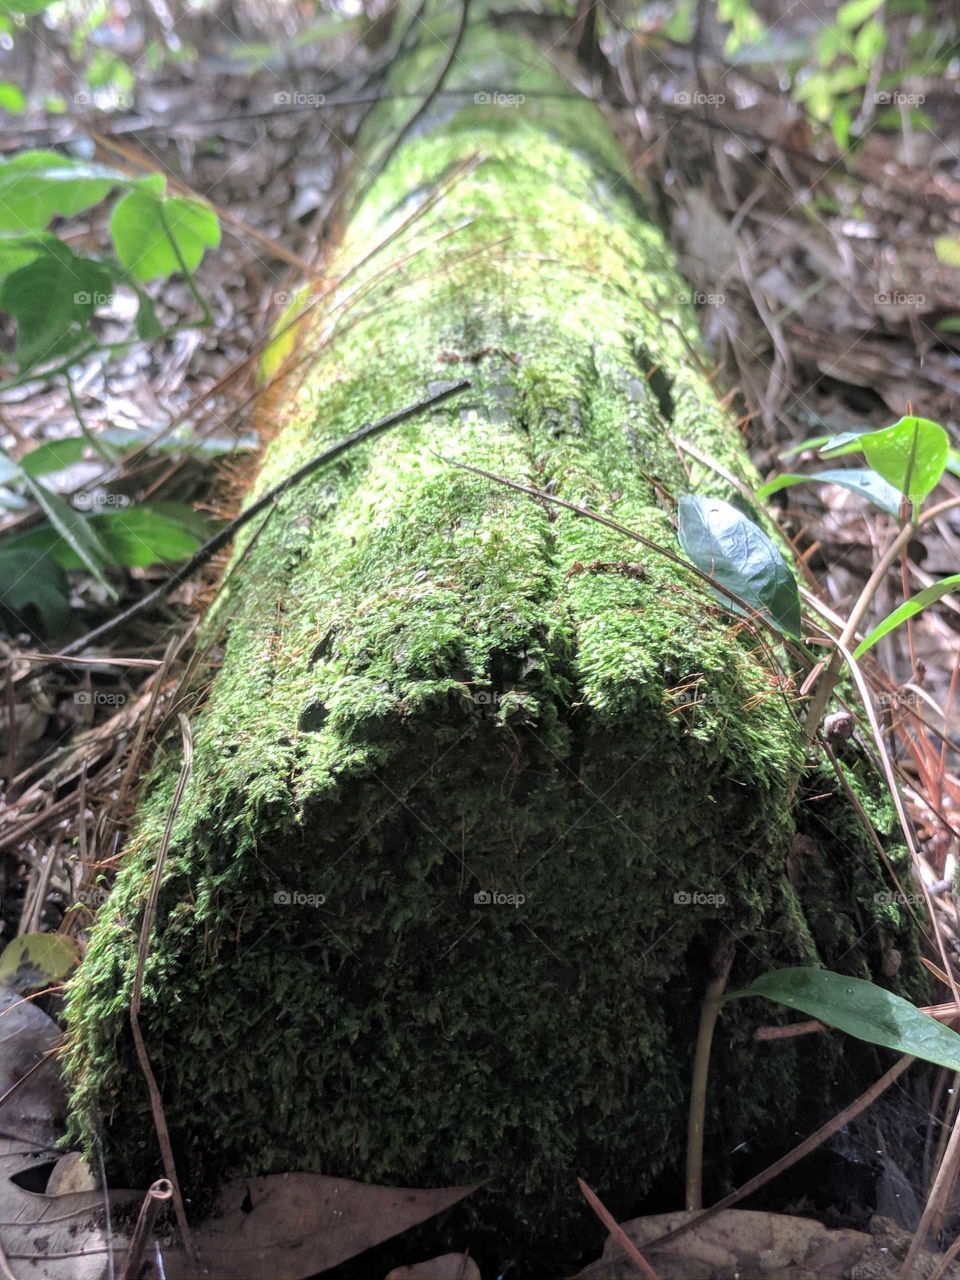 Tree Log Covered in Moss